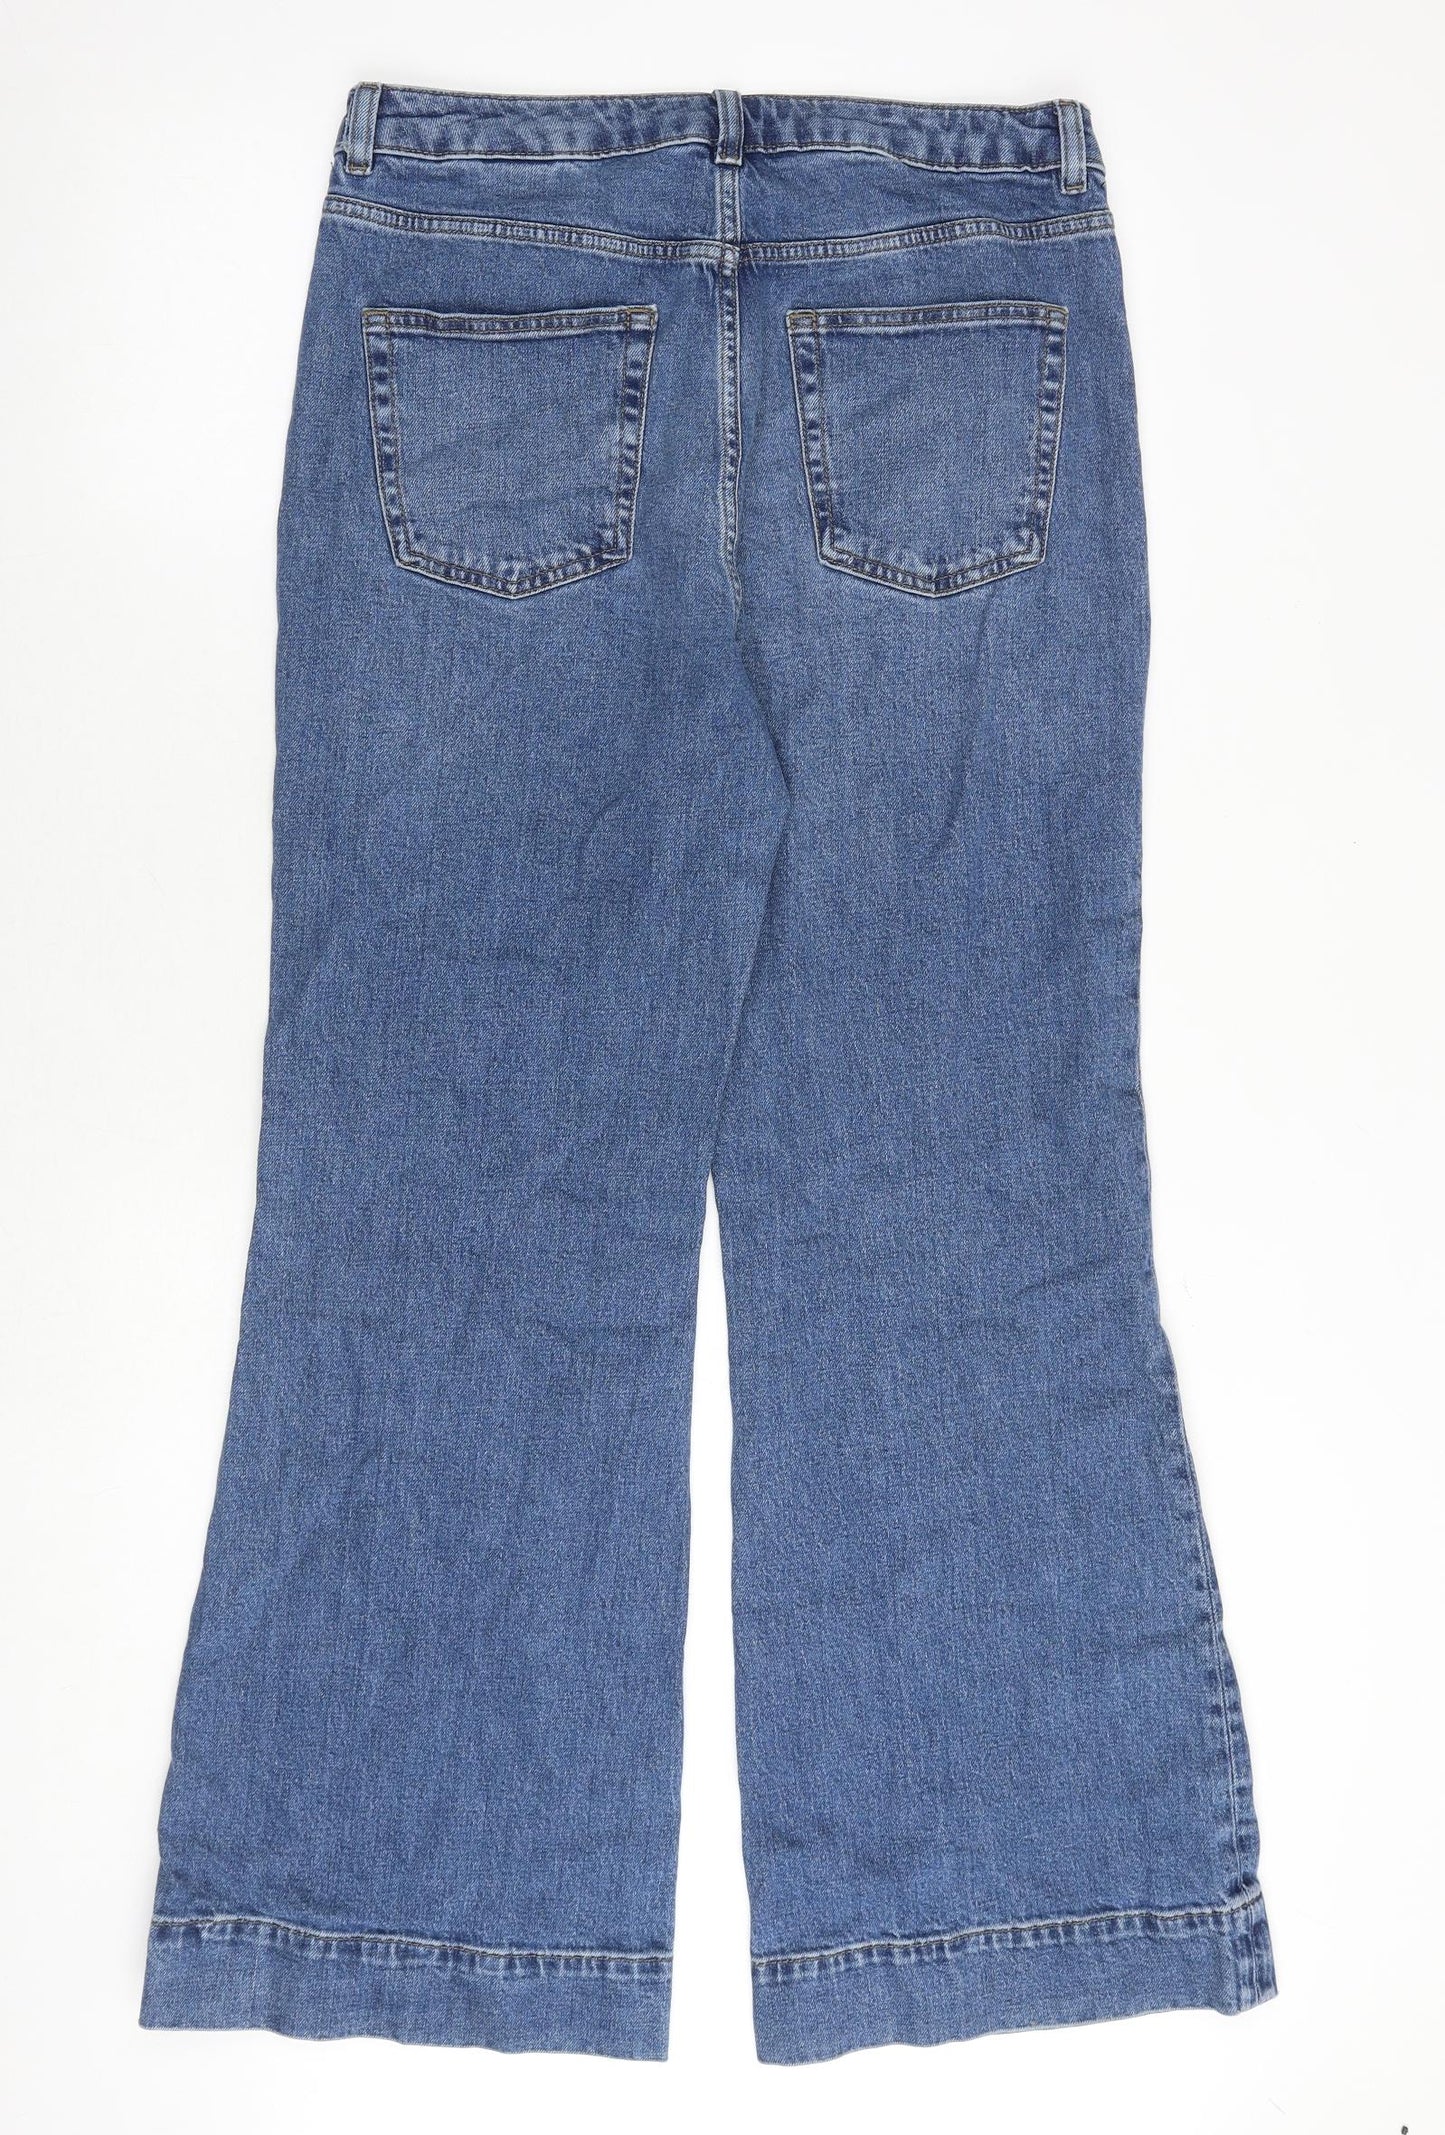 Marks and Spencer Womens Blue Cotton Bootcut Jeans Size 14 Regular Zip ...